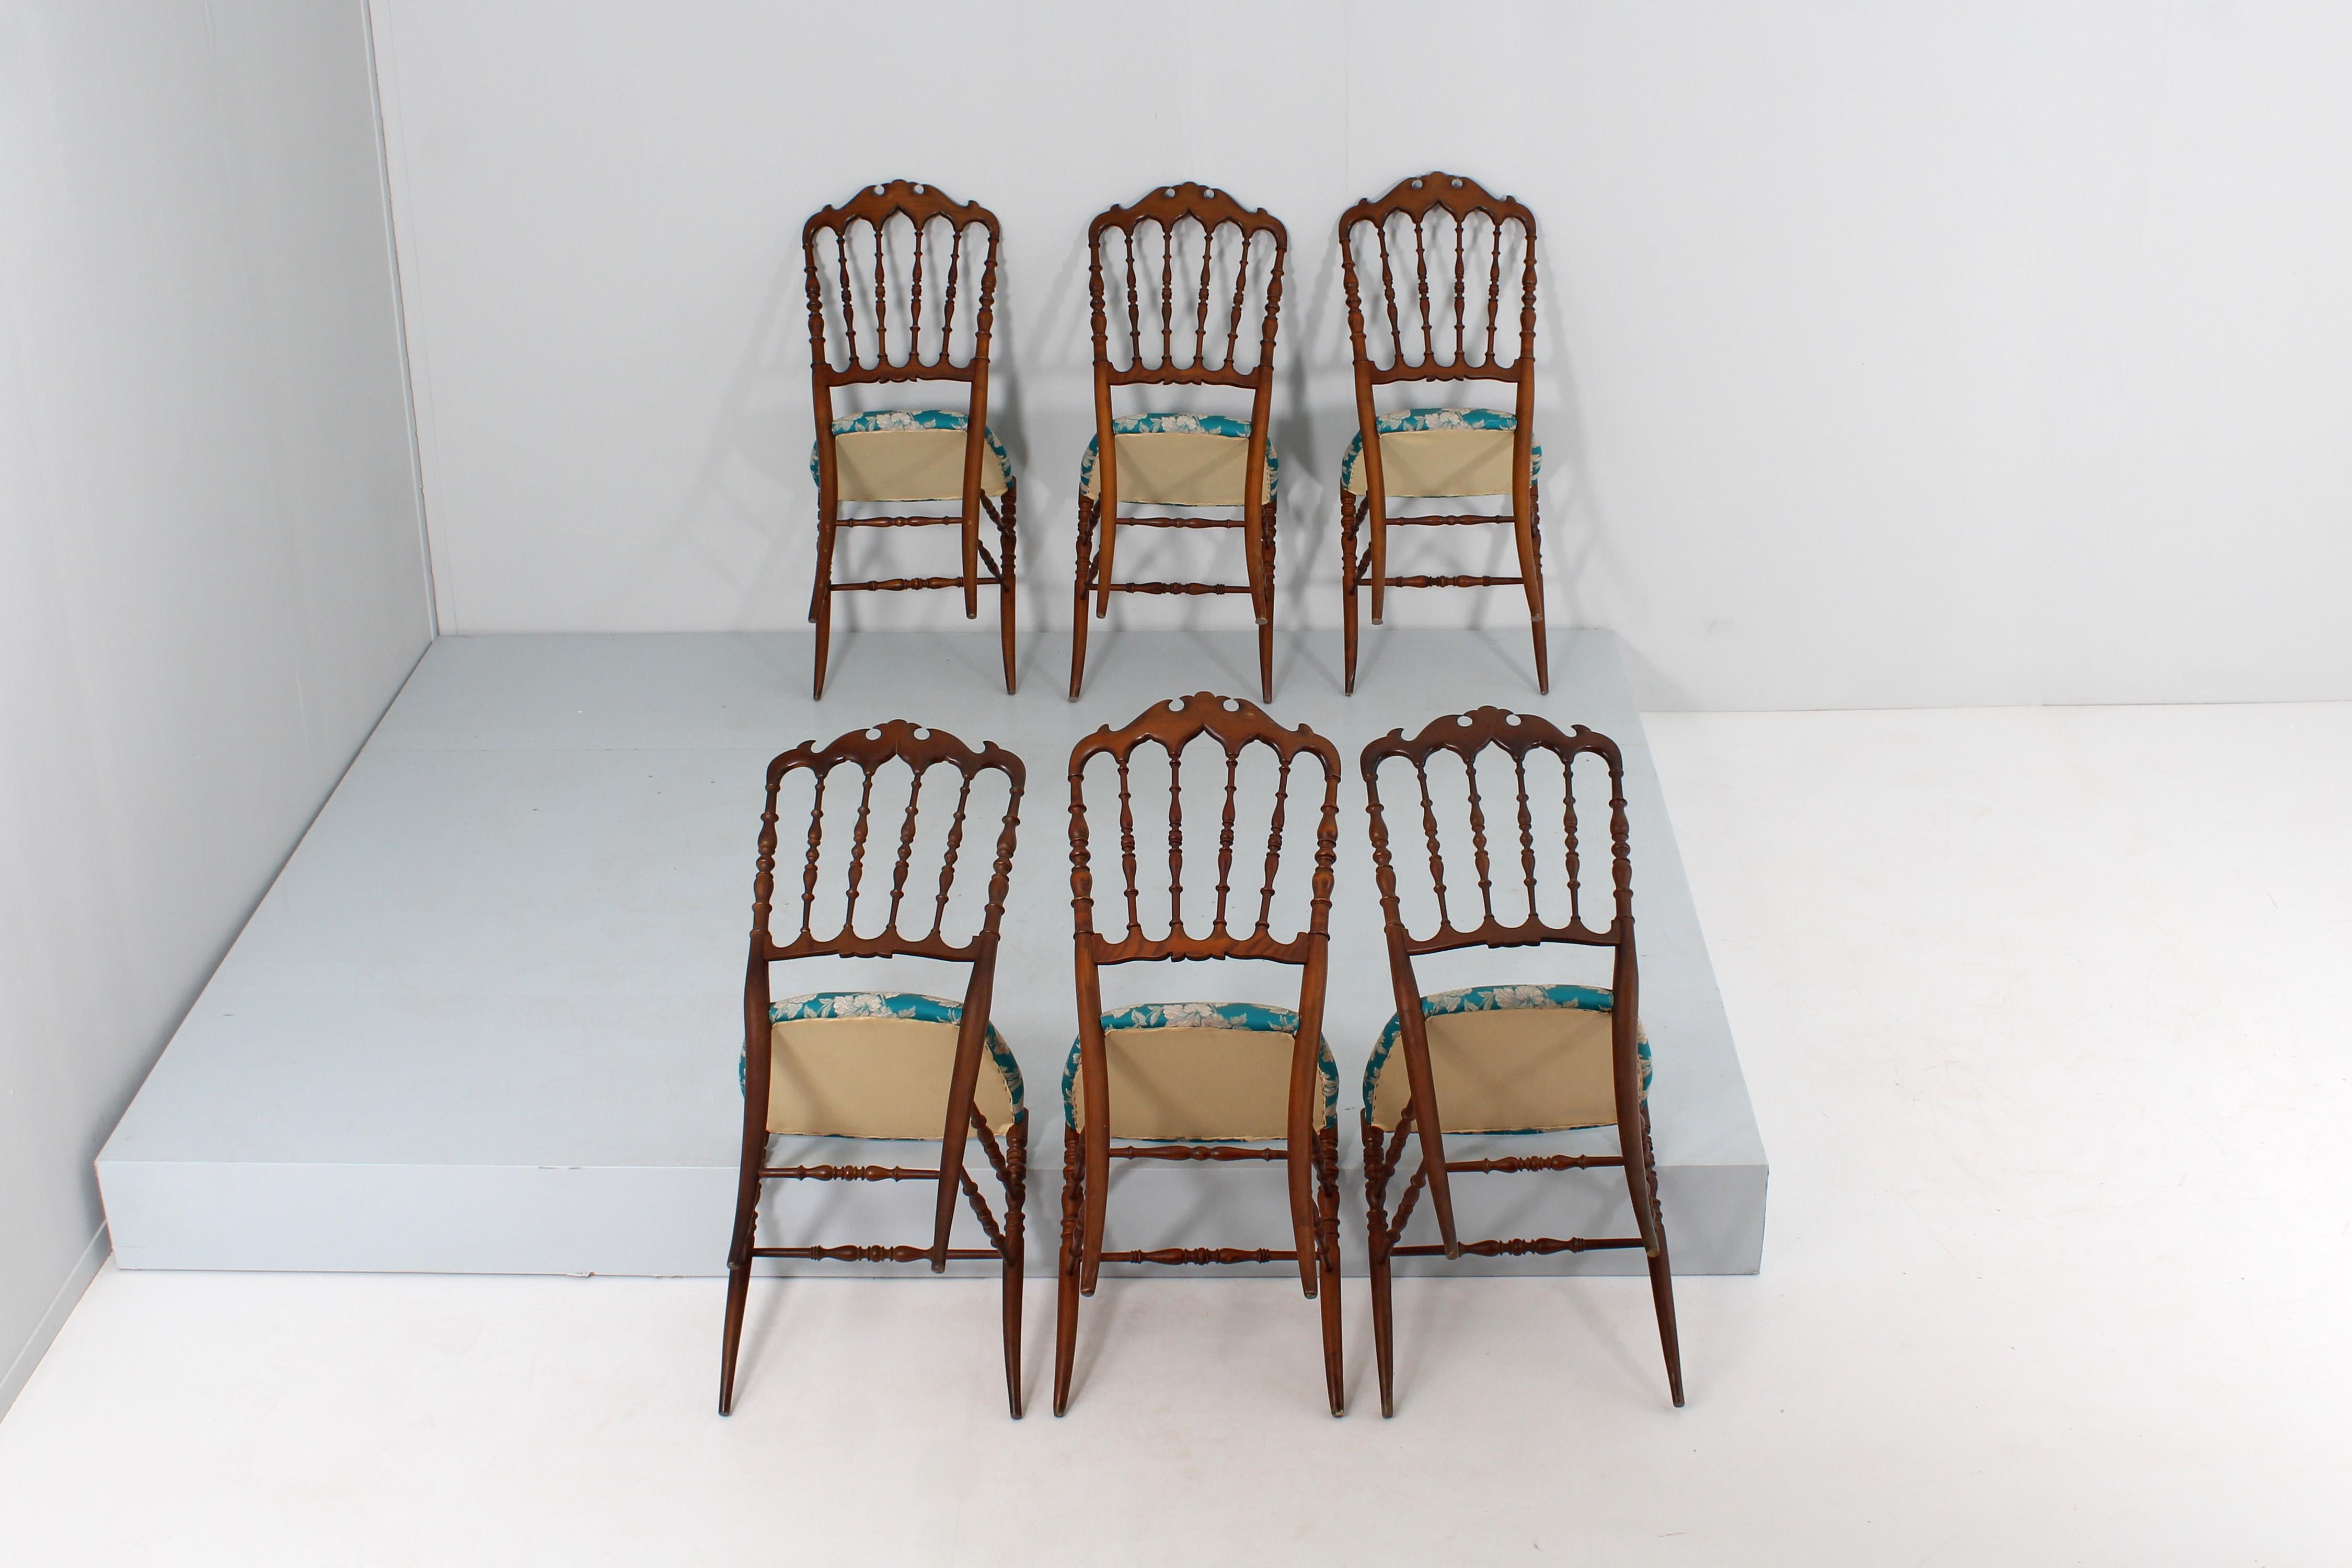 Fabric Mid-Century Chiavarina Wooden Chairs Set of 6, 1950s, Italy For Sale